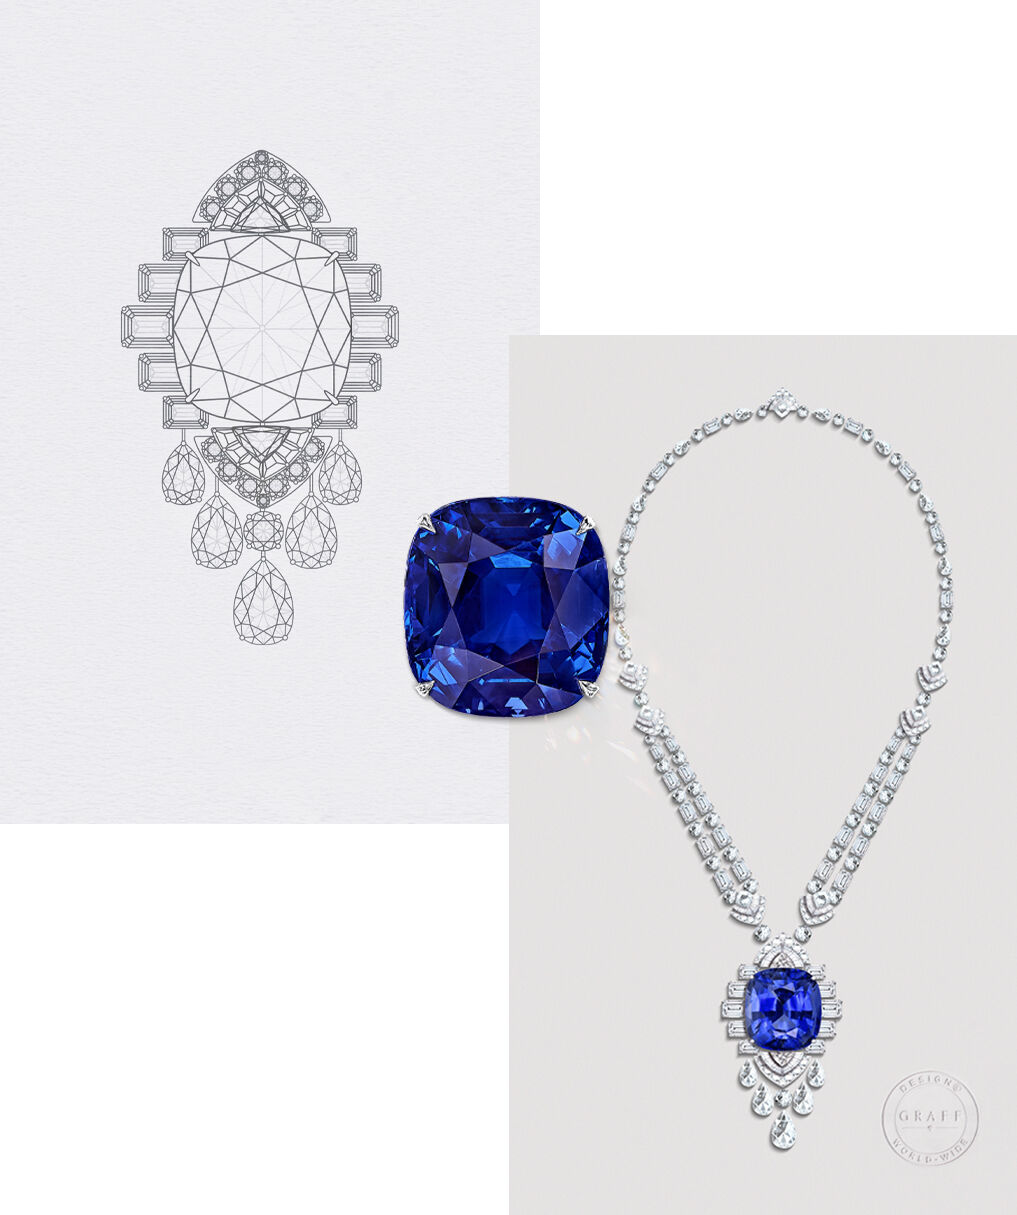 Drawing and painting of Graff High Jewellery Sapphire and Diamond Necklace